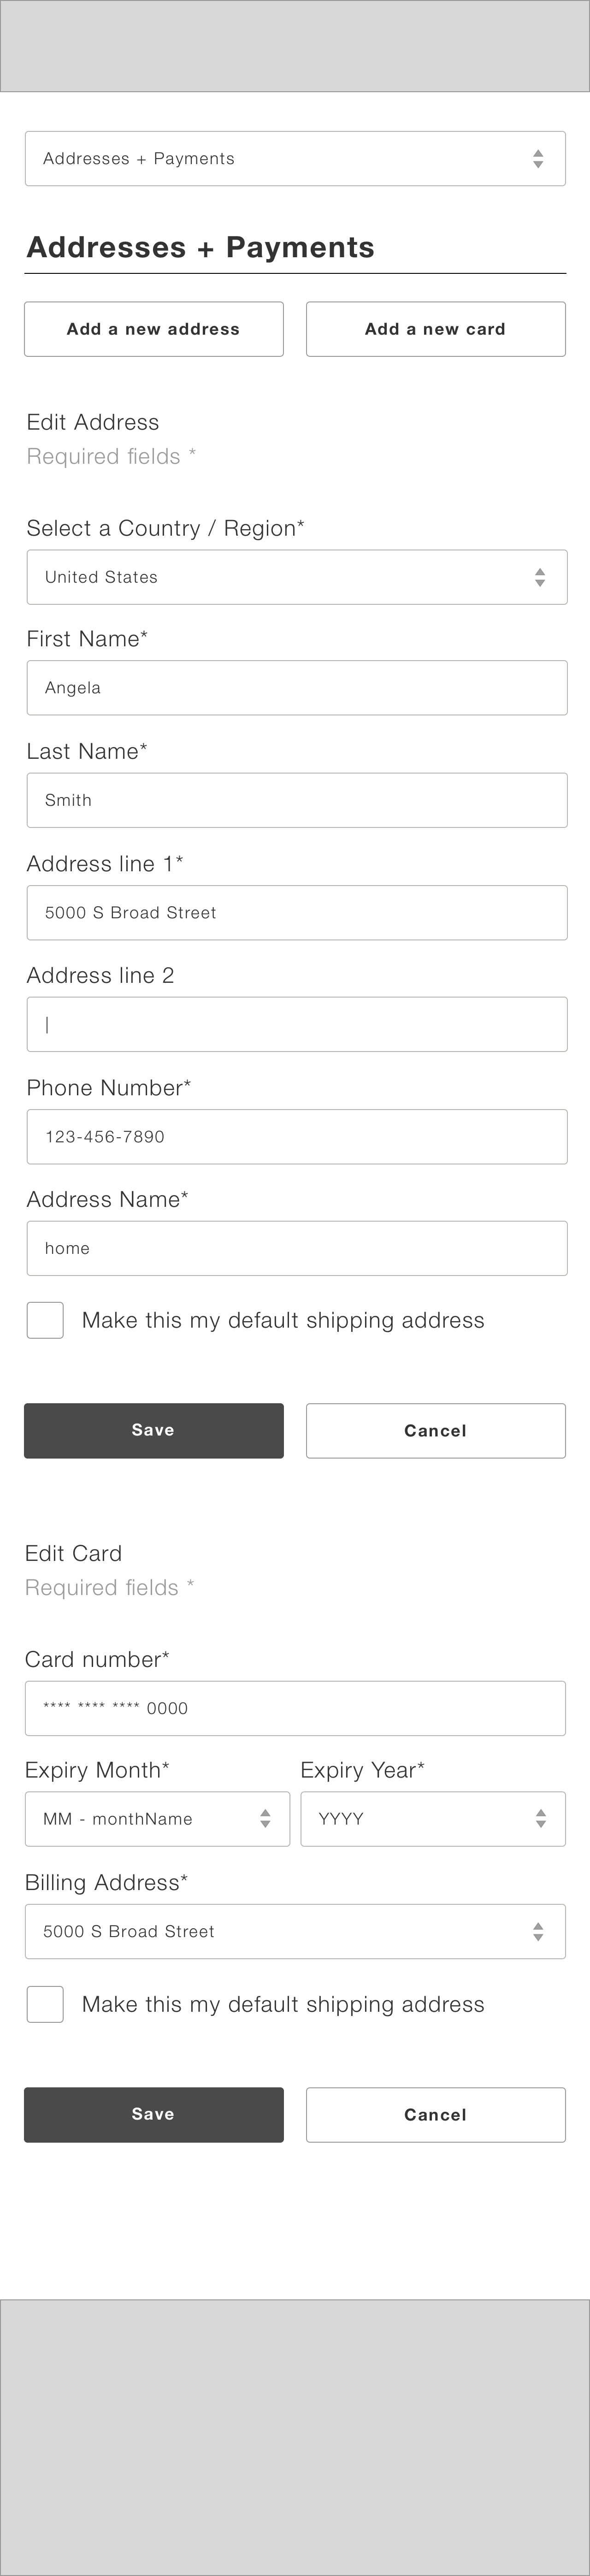 mobile image forms